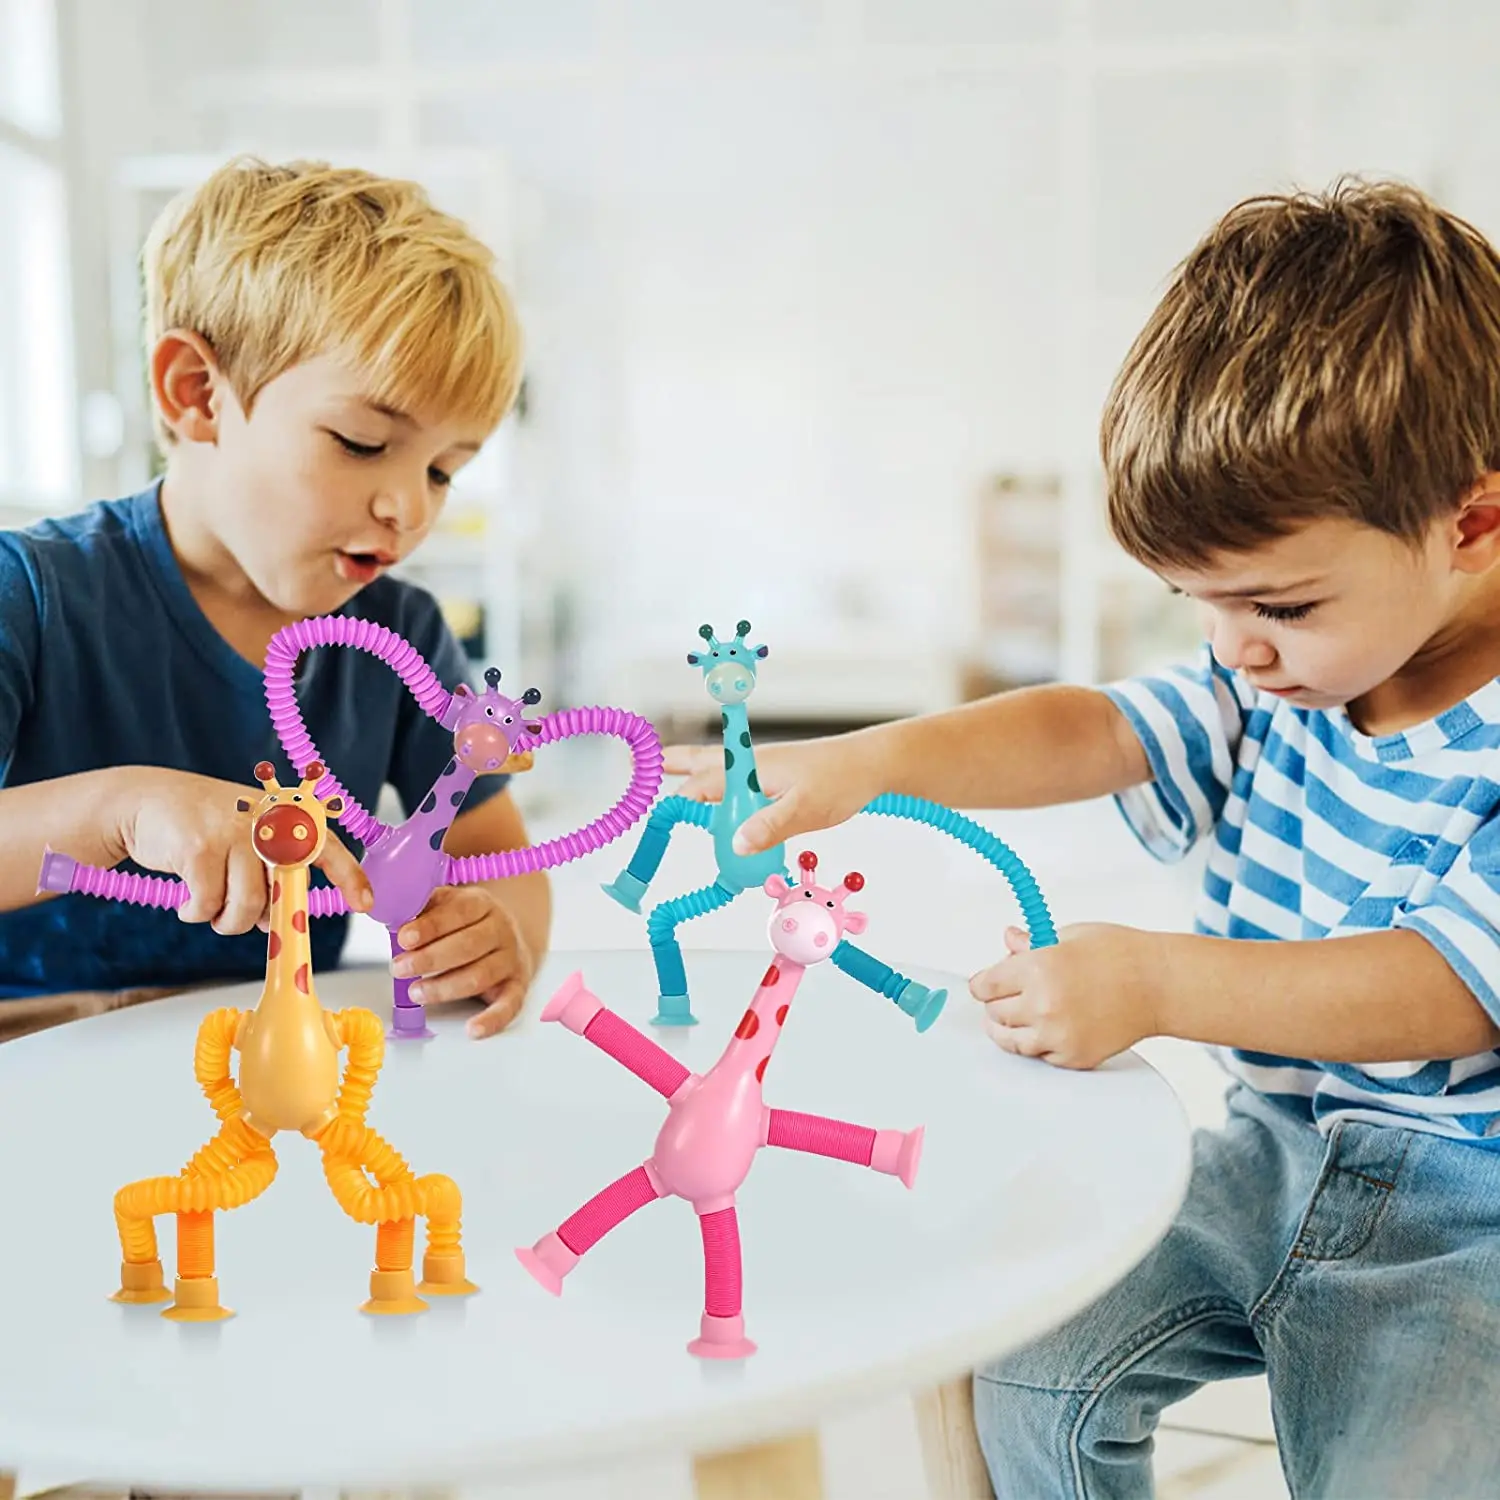 4 Pcs Telescopic Suction Cup Giraffe Toy Cartoon Puzzle Suction Cup Parent-Child Interactive Decompression Toy Stress Relief enlarge